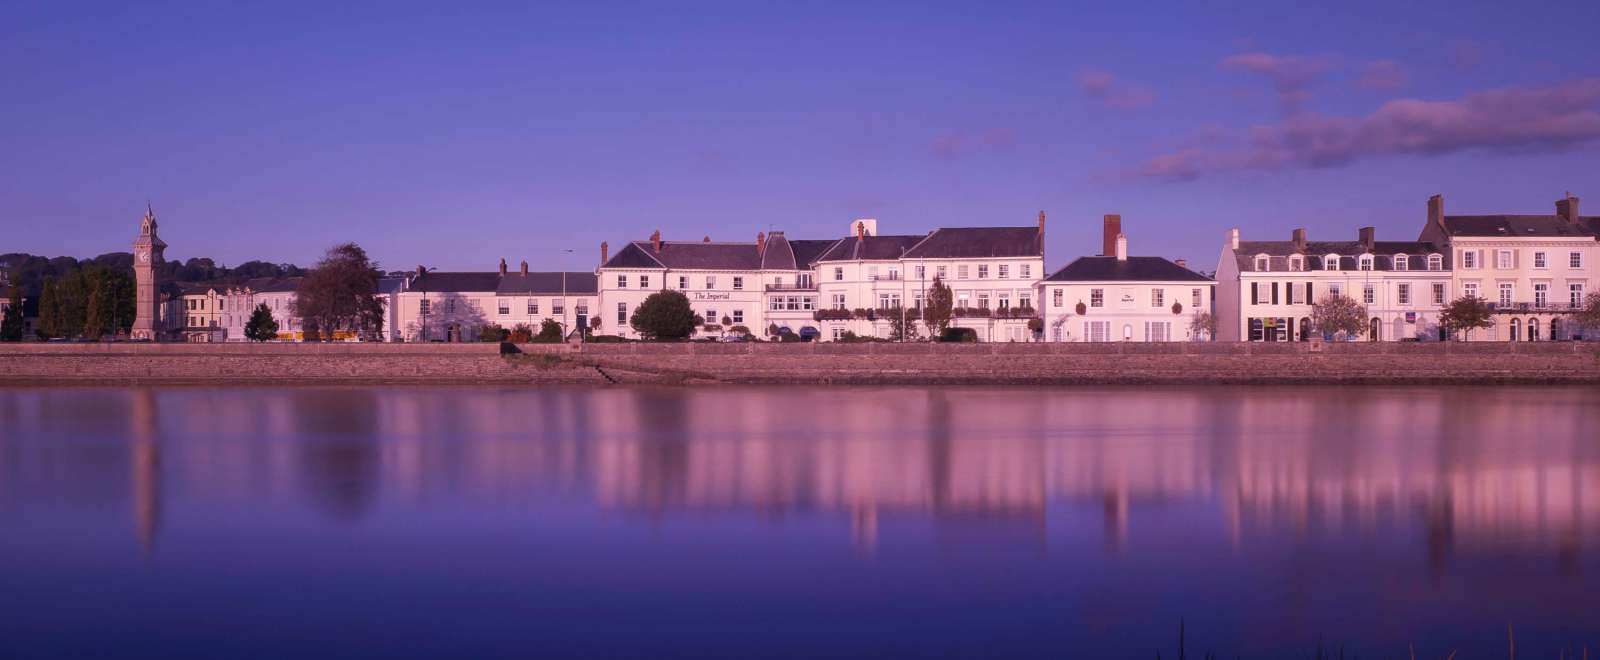 Imperial Hotel Exterior View from River Taw in the Evening